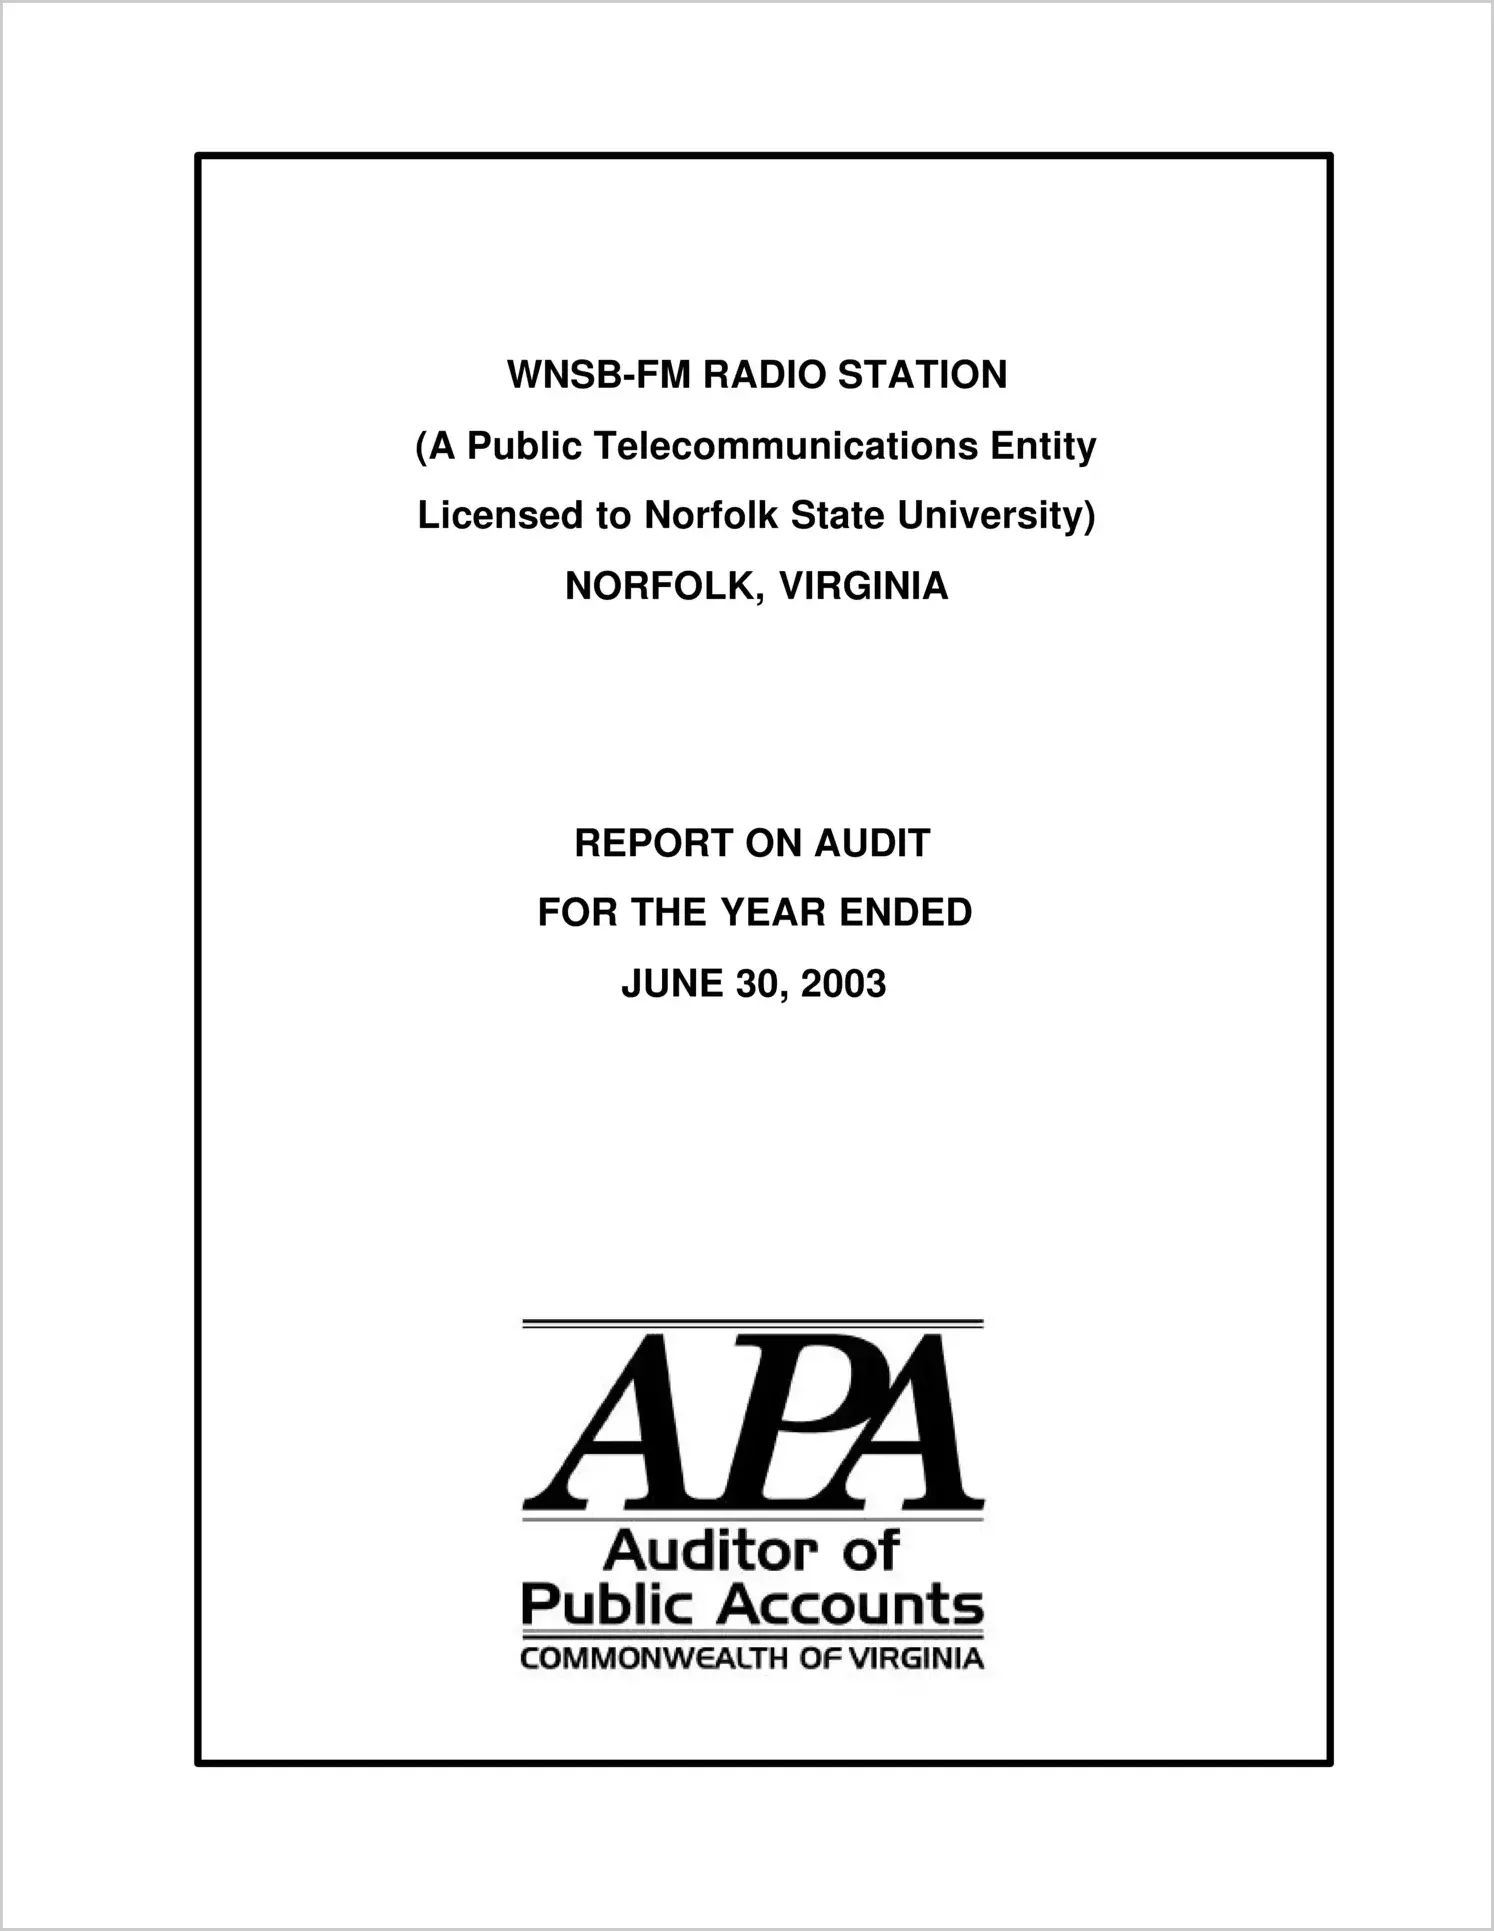 Norfolk State University WNSB-FM Radio Station for the year ended June 30, 2003